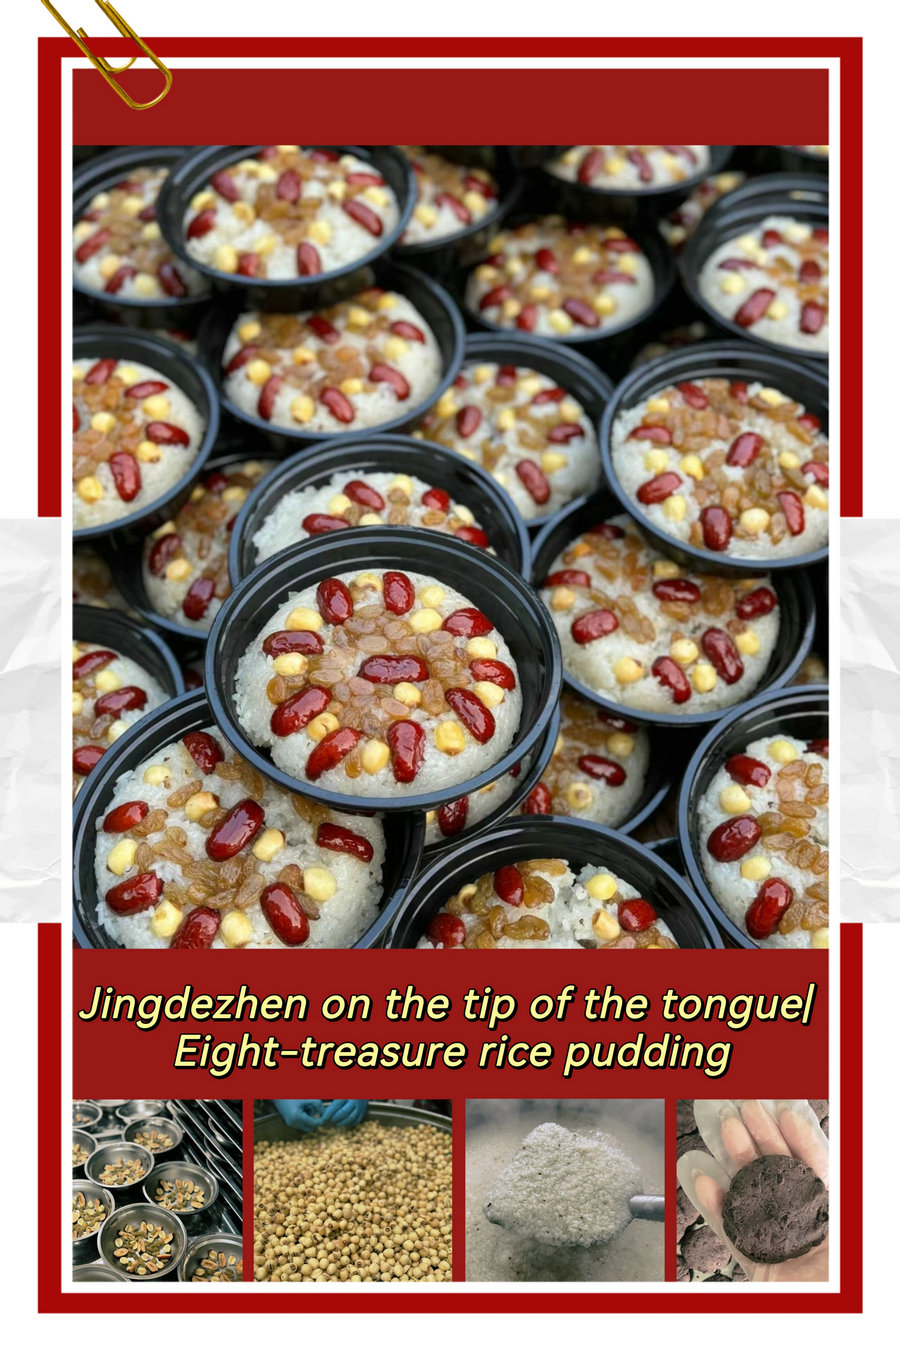 Jingdezhen on the tip of the tongue| Eight-treasure rice pudding